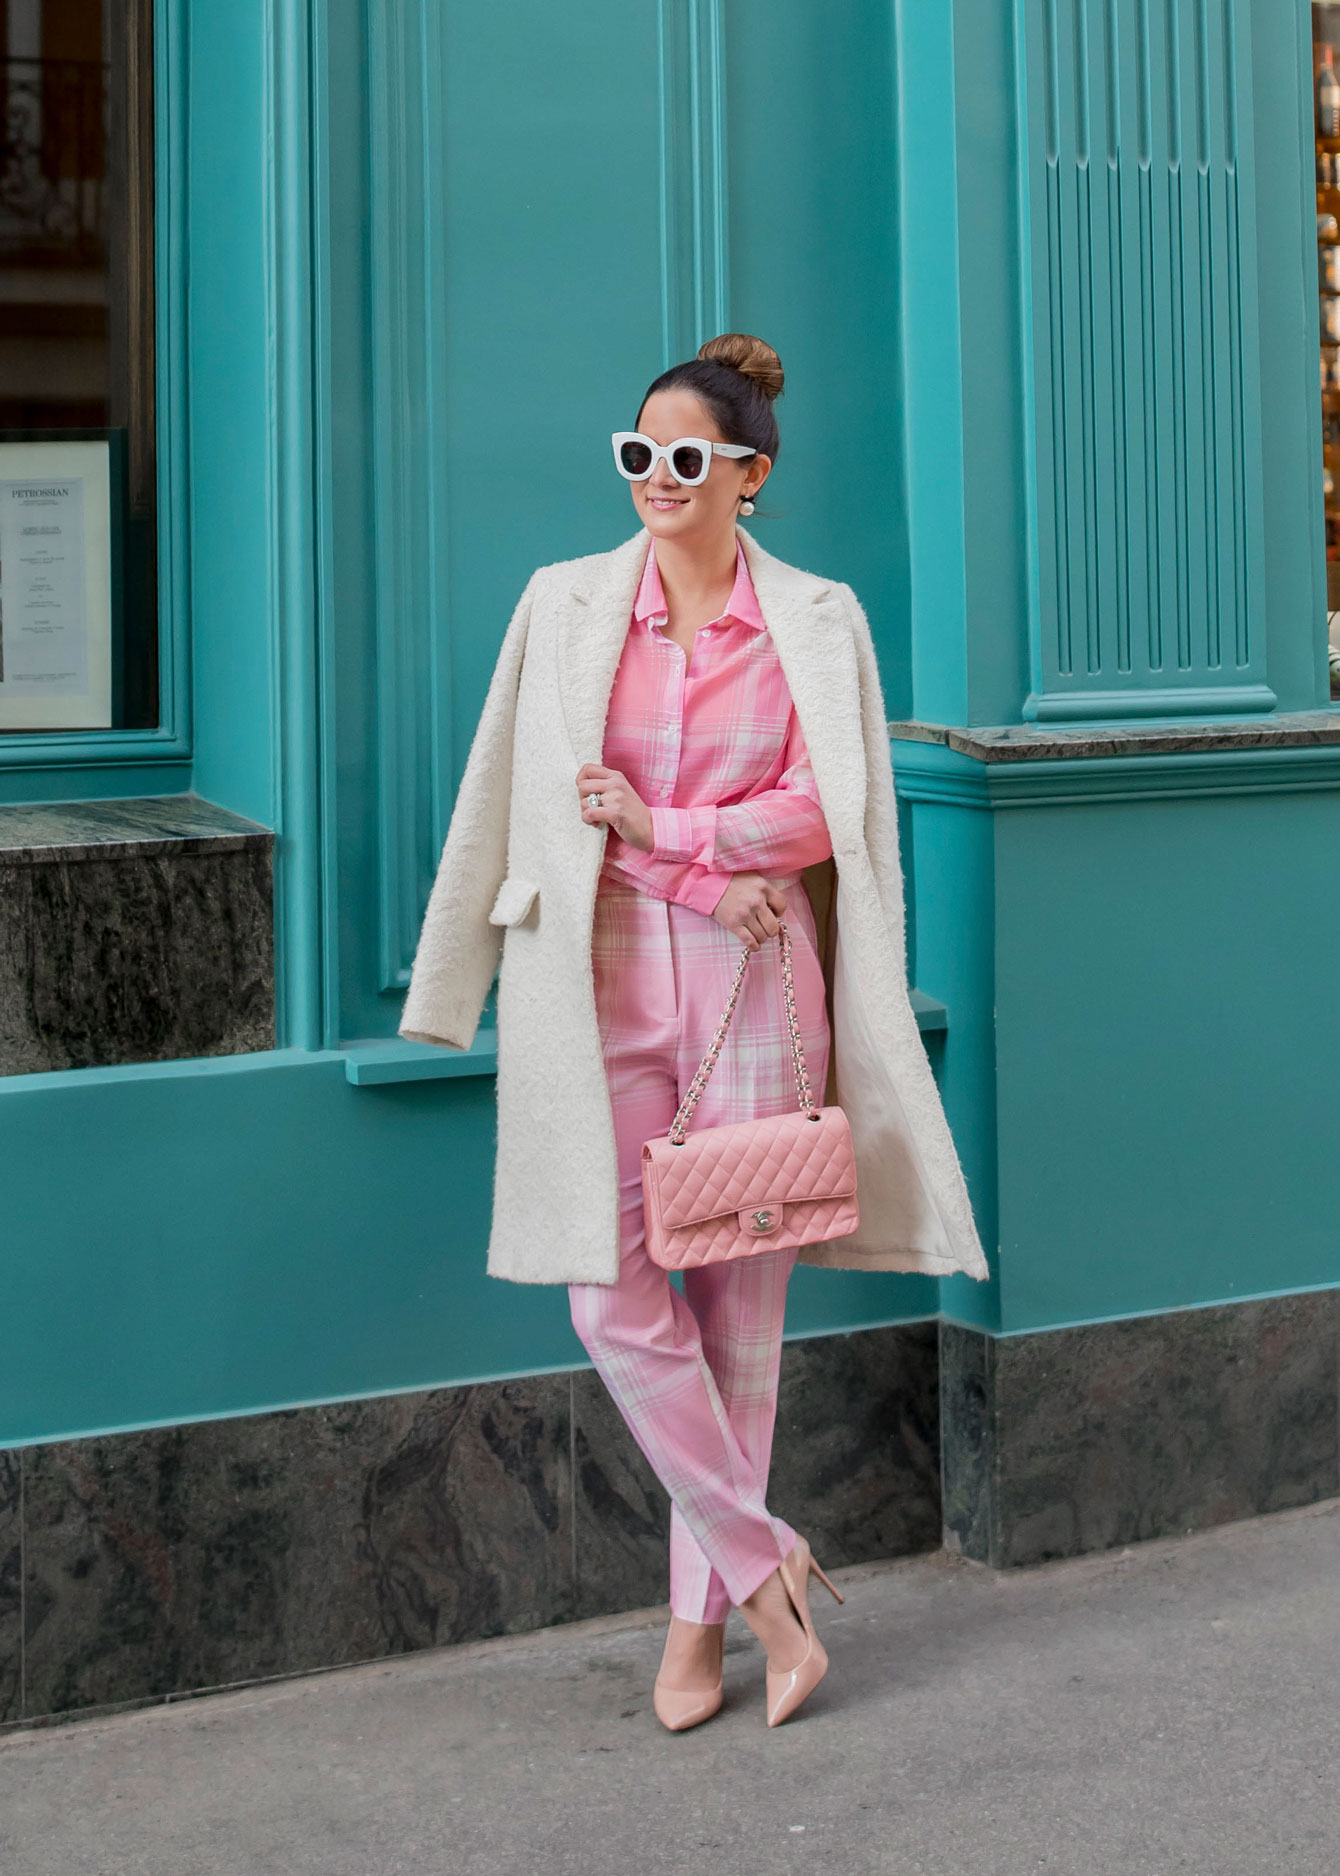 ASOS Pink Check Outfit and Pink Chanel Bag in Paris